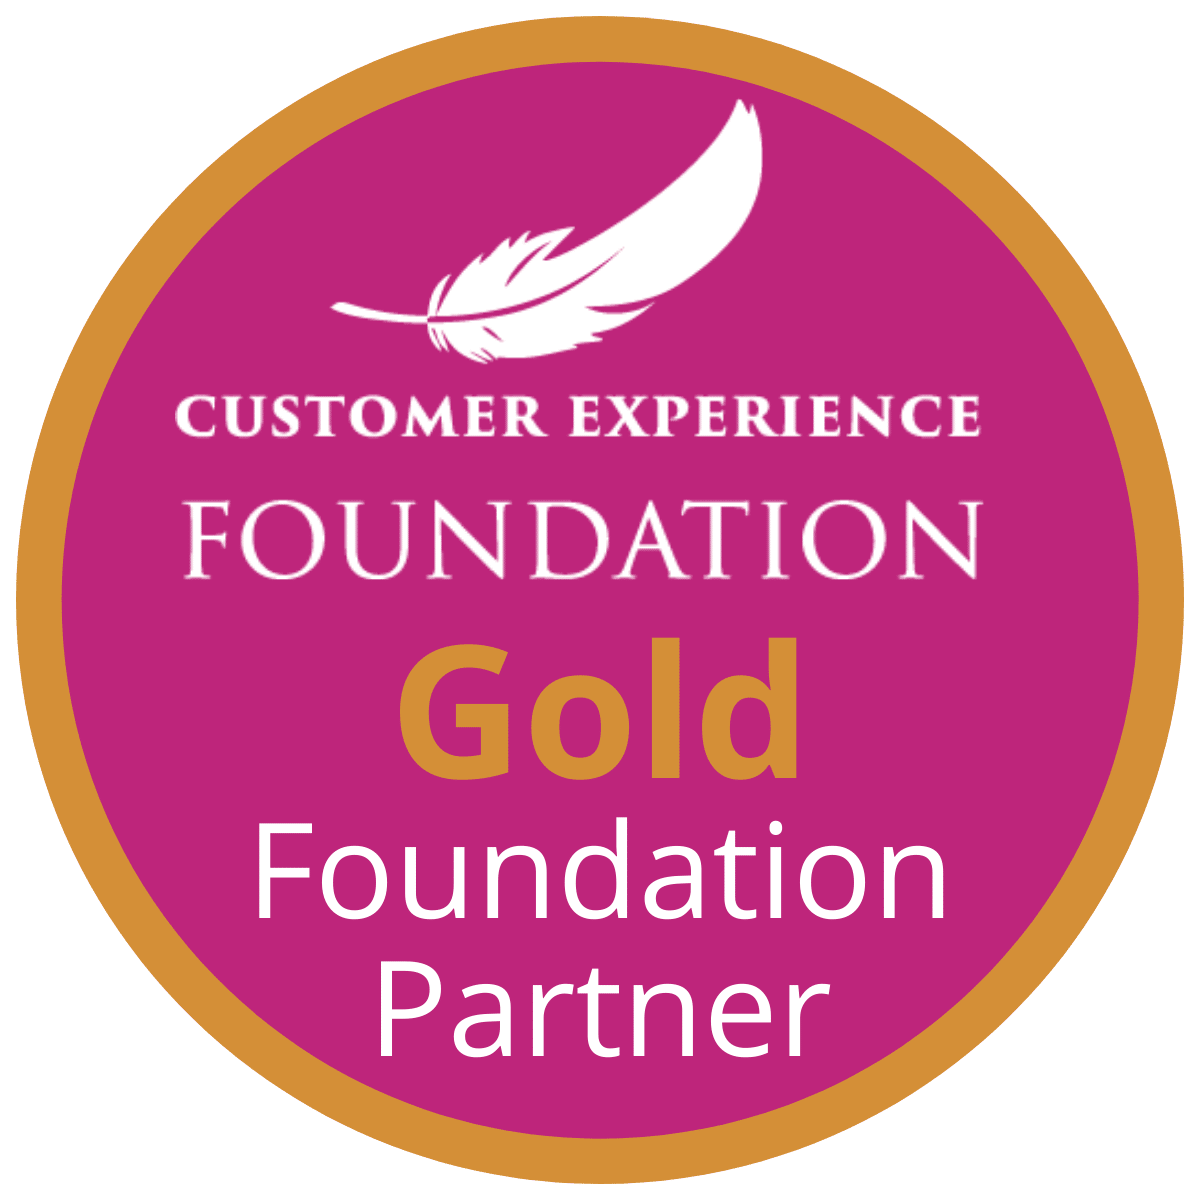 ChatLingual is a Customer Experience Foundation Gold Partner.